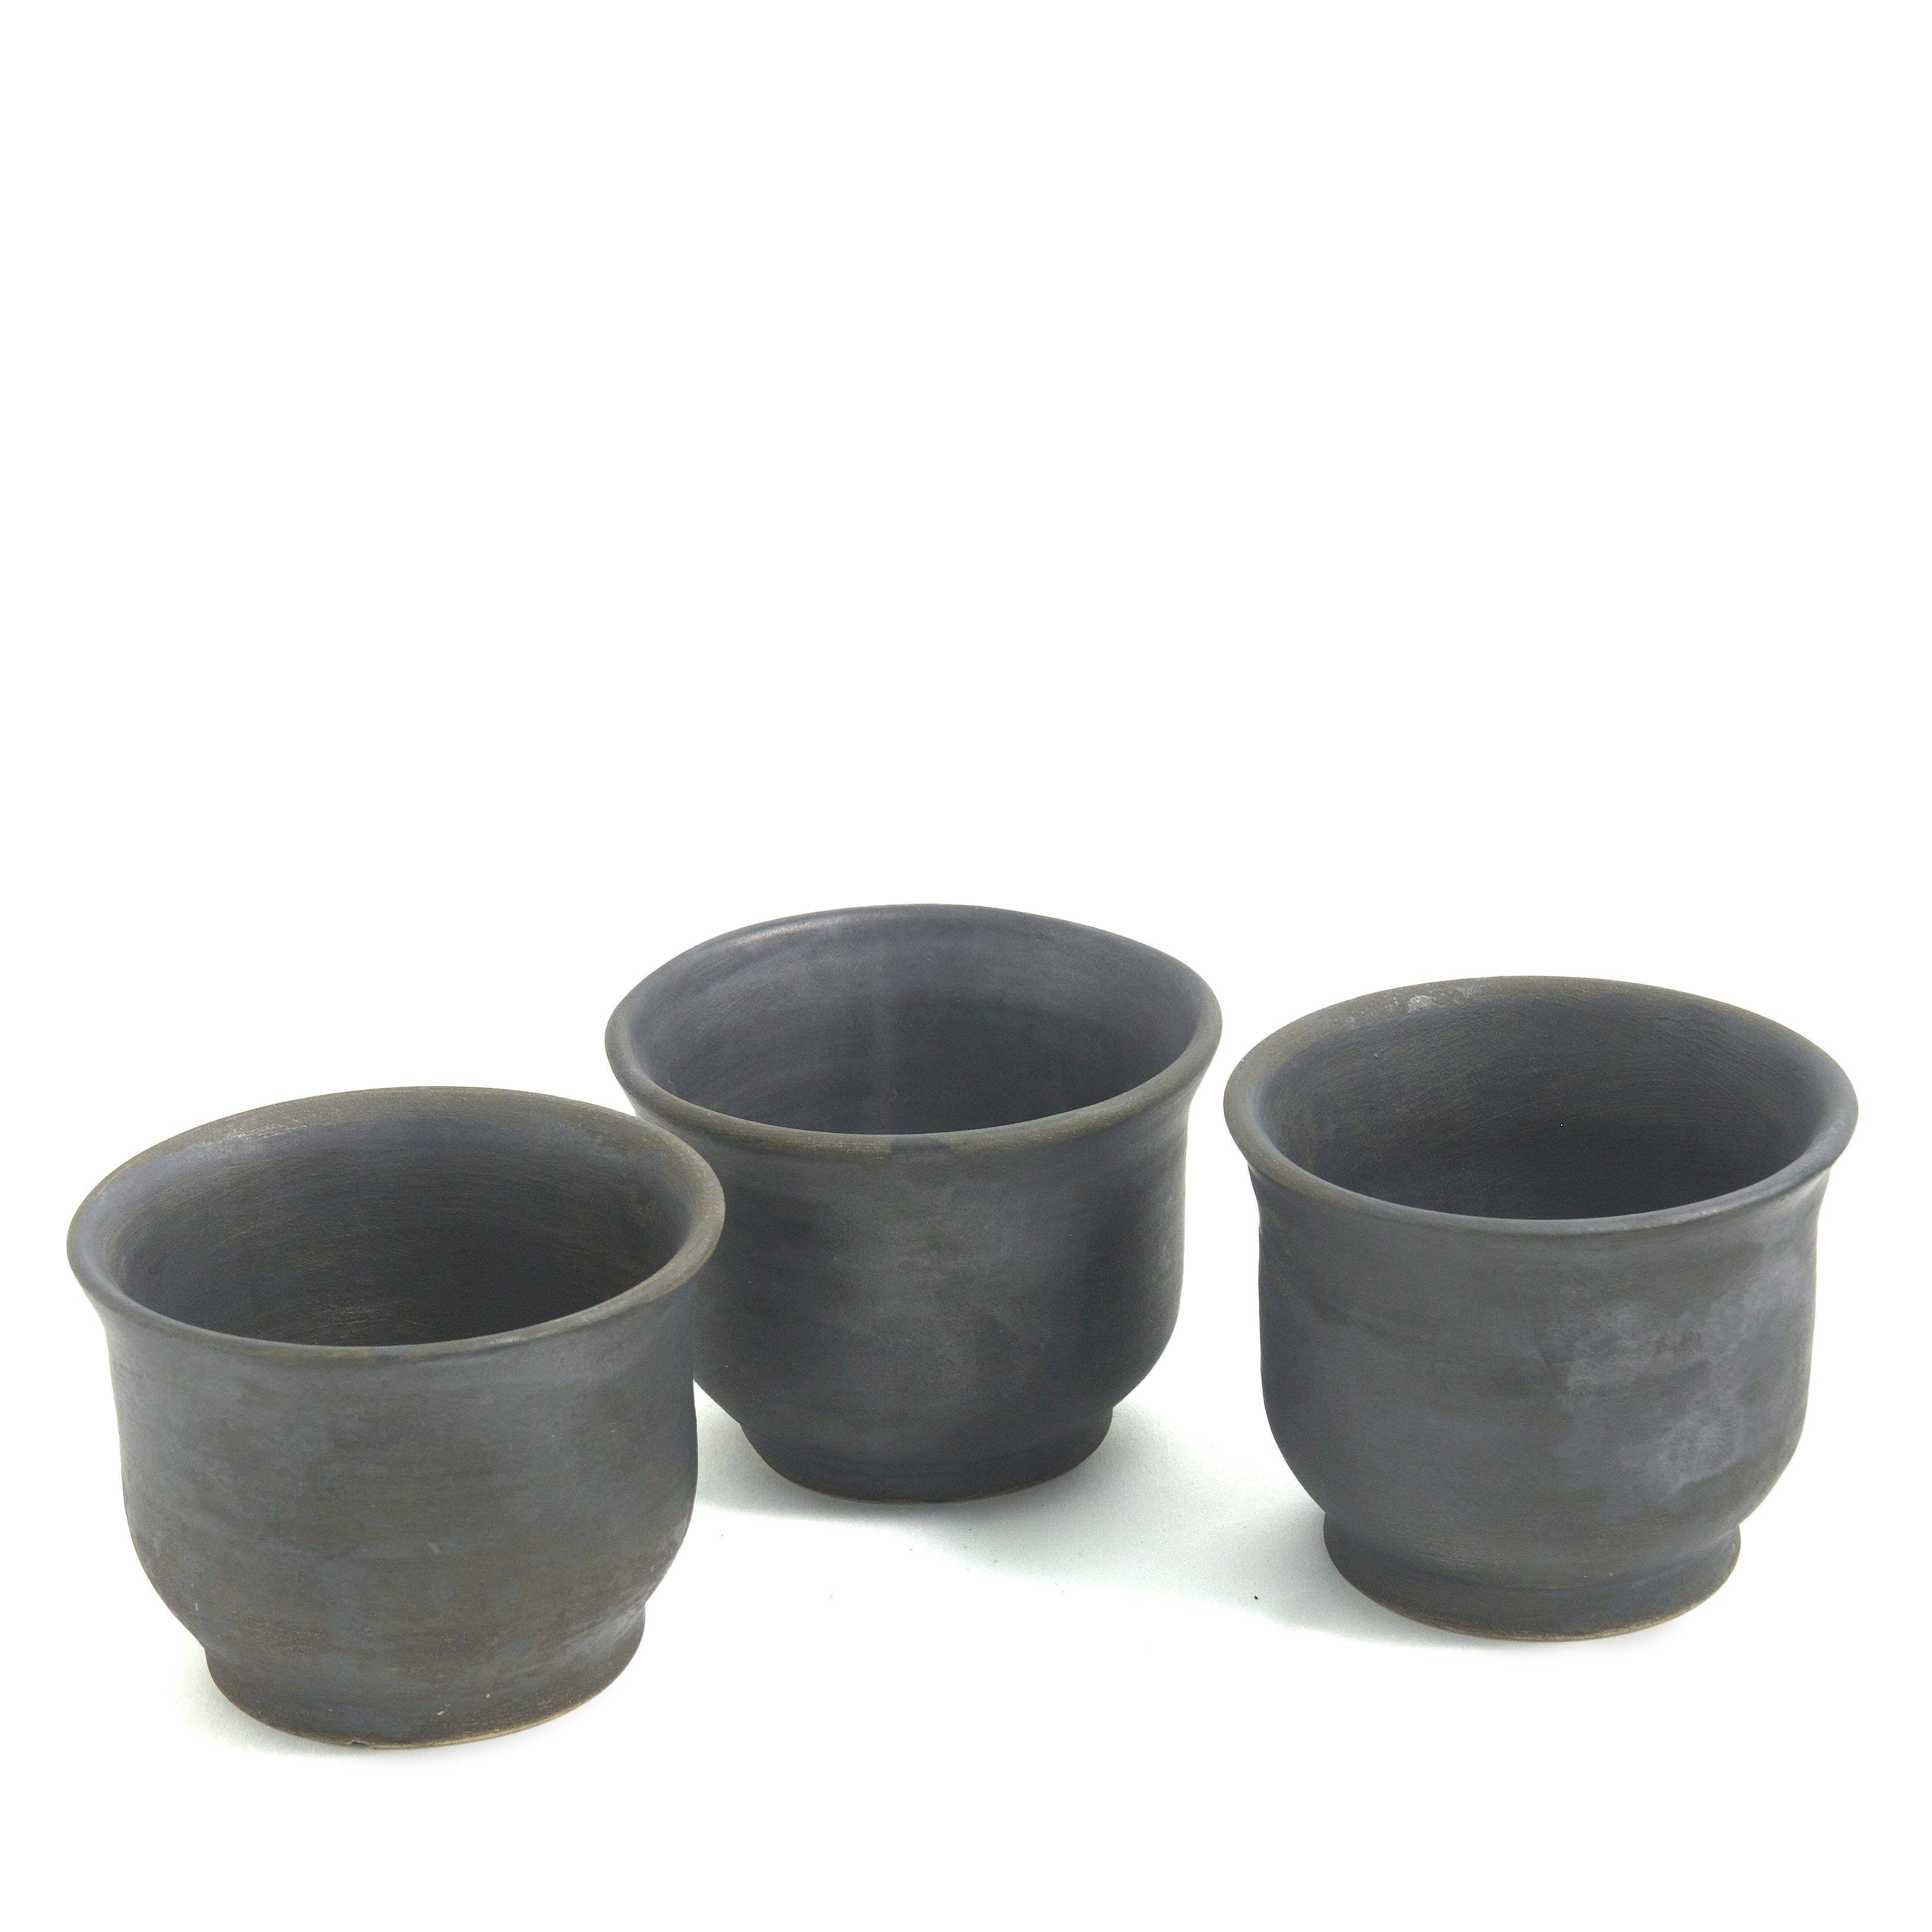 Earth 3 cups

This set of three cups in matte, black ceramic deftly handcrafted on the lathe makes for an exclusive addition to modern tableware collections, accenting them with a dash of Eastern flair. The pieces are fashioned following the